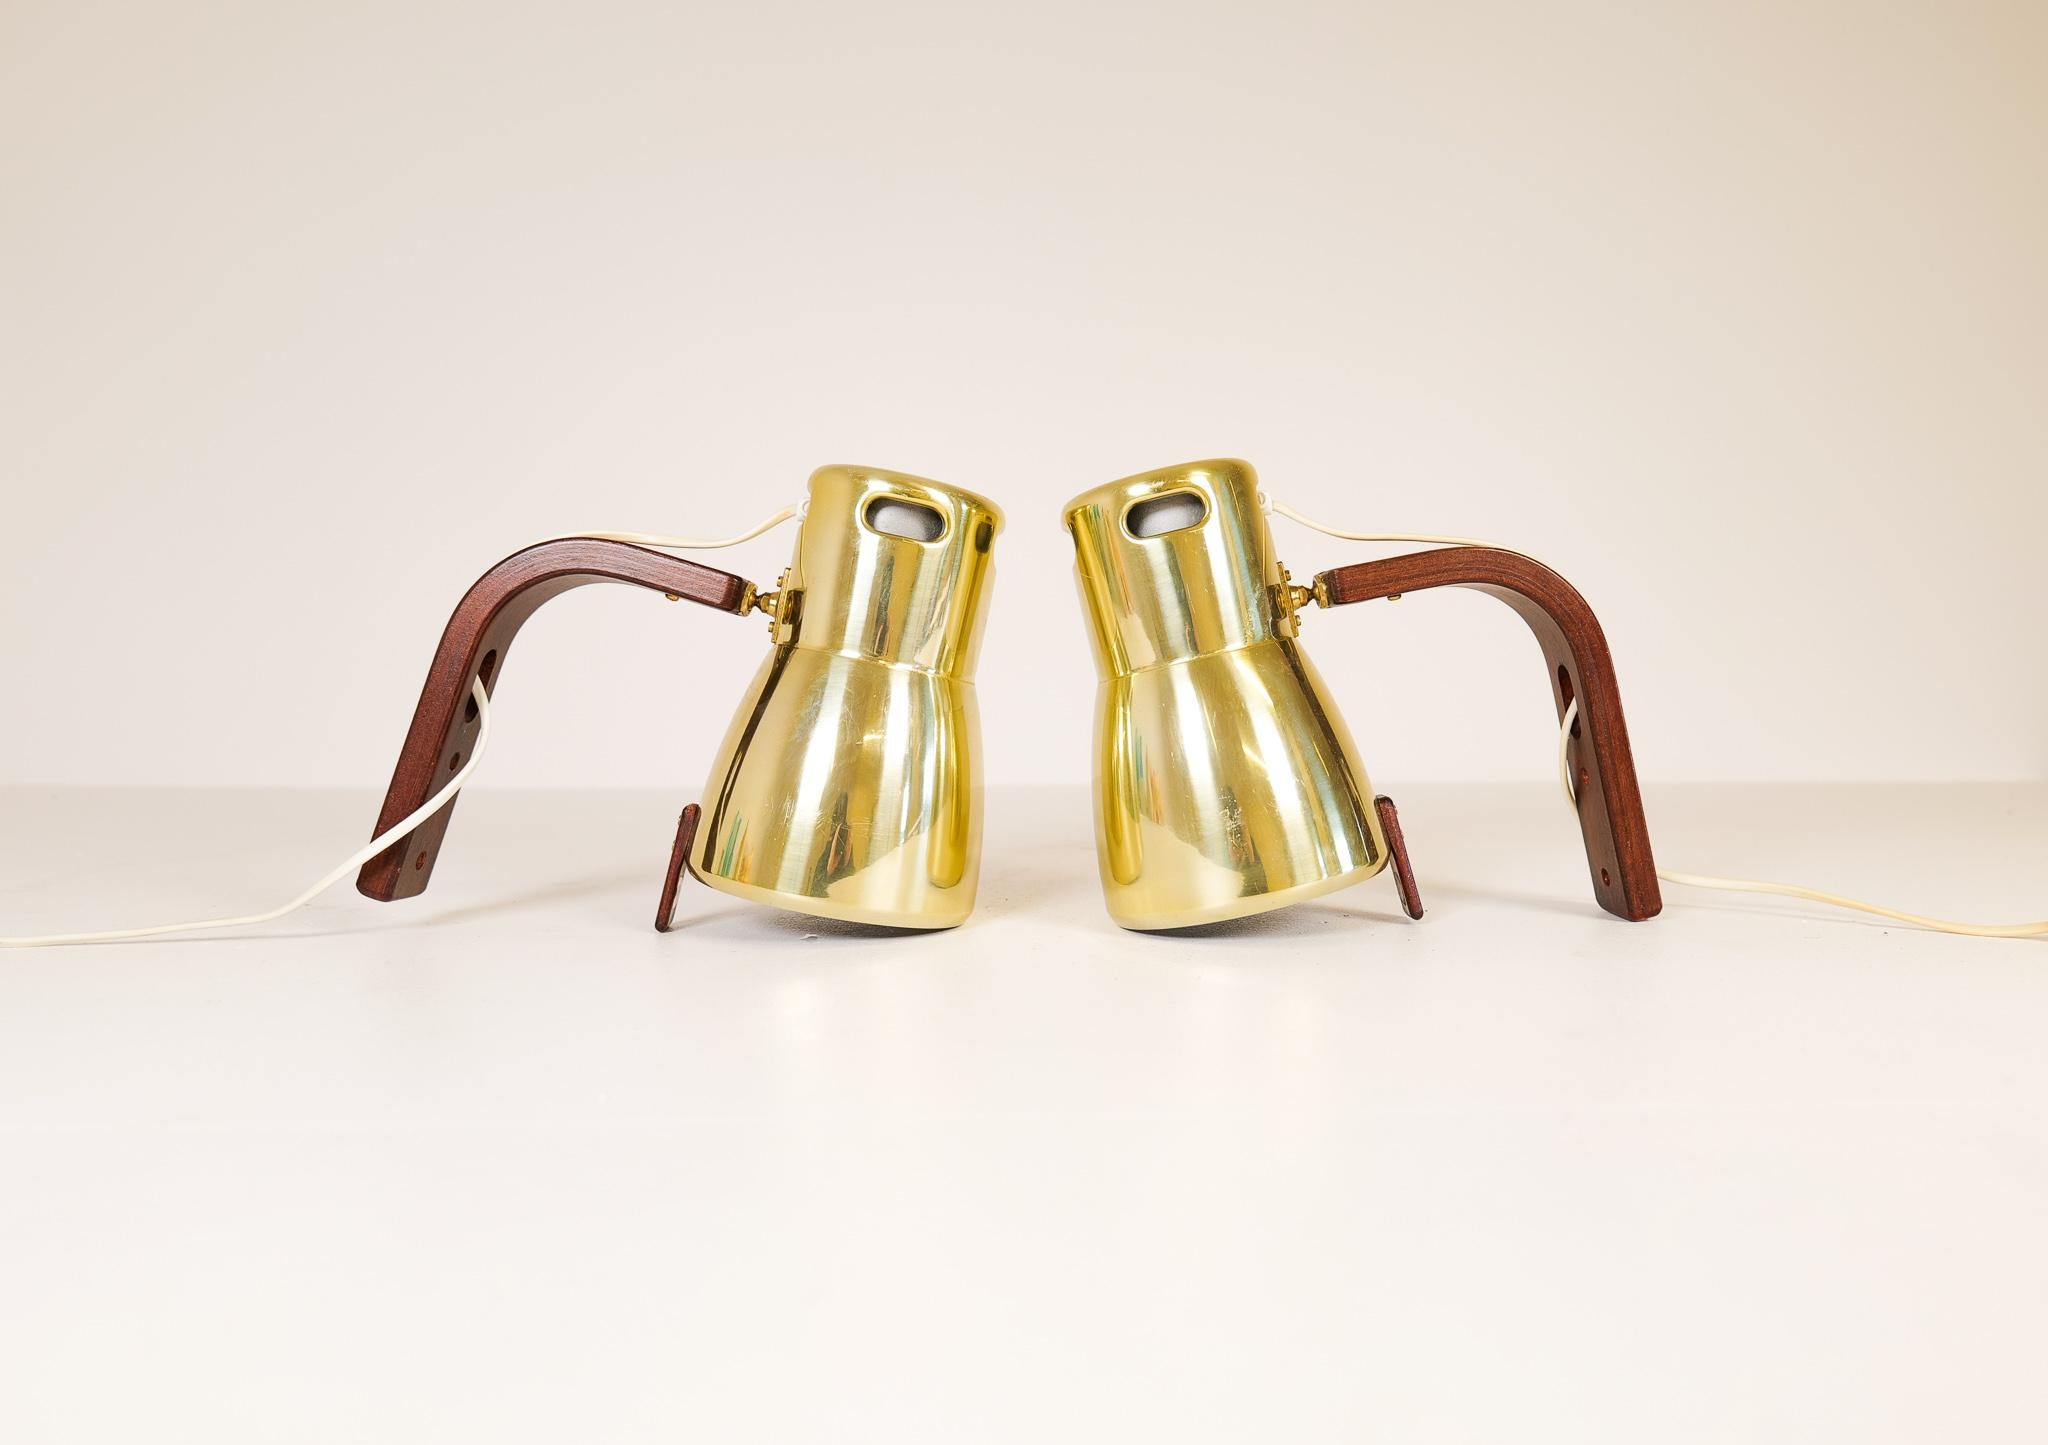 Hans-Agne Jakobsson Brass and Stained Wood Wall Lamps, Sweden, 1970s In Good Condition For Sale In Hillringsberg, SE